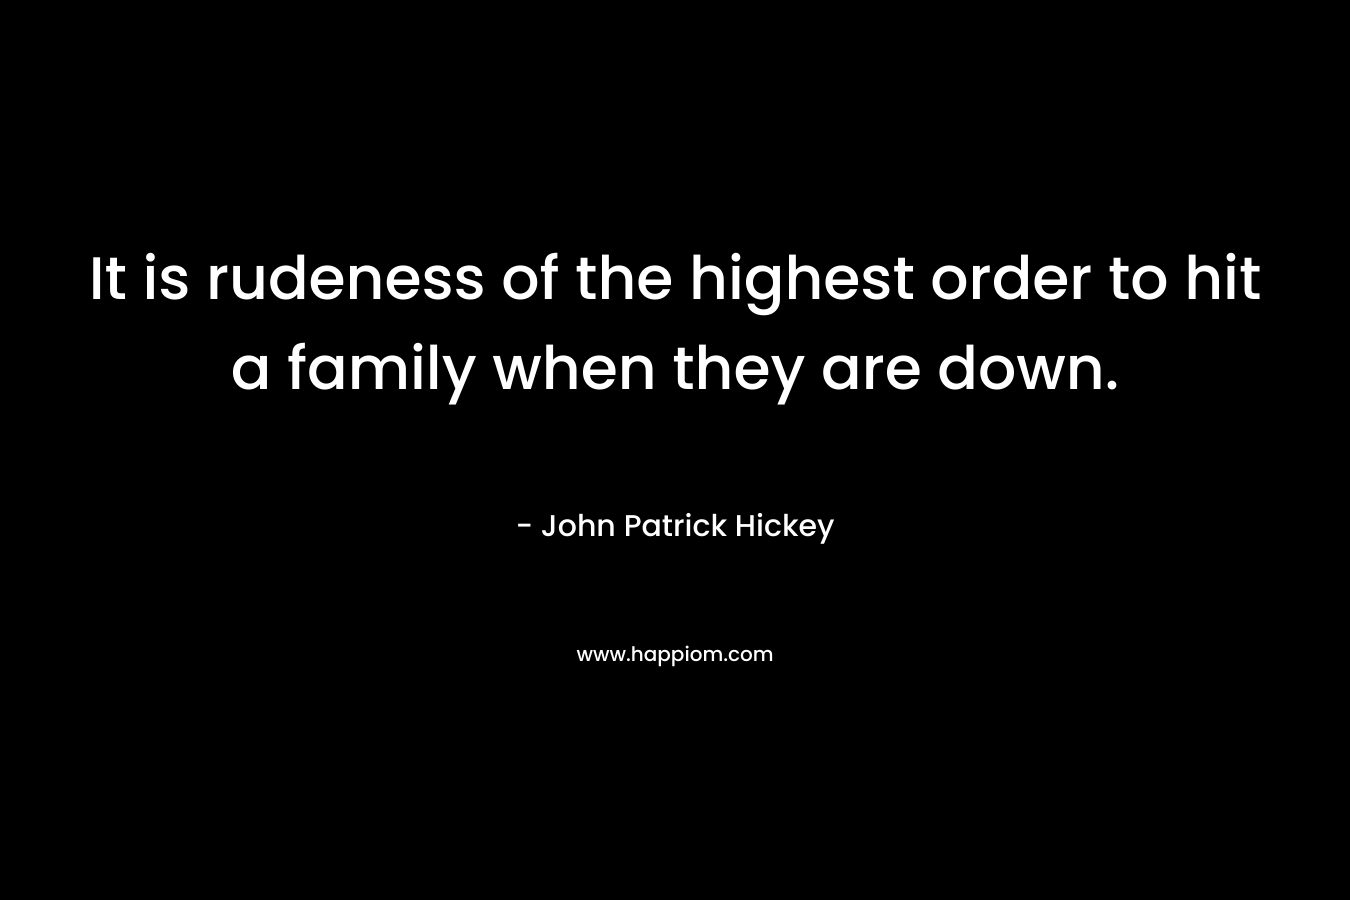 It is rudeness of the highest order to hit a family when they are down.